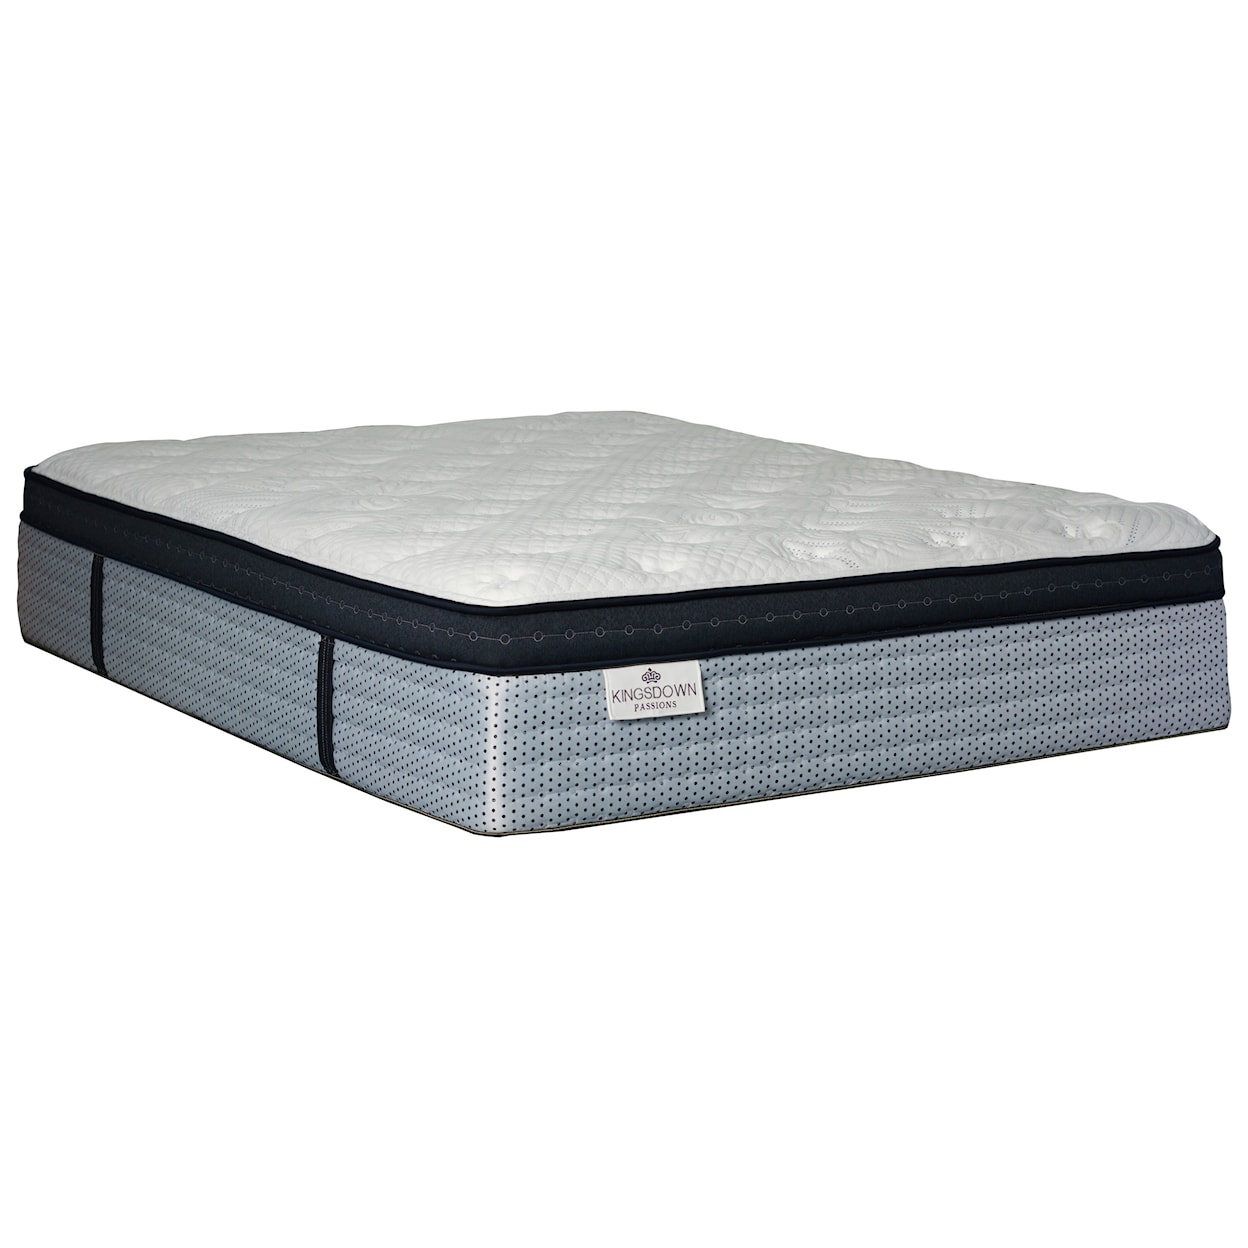 Kingsdown Brimsted ET Twin XL Pocketed Coil Mattress Set